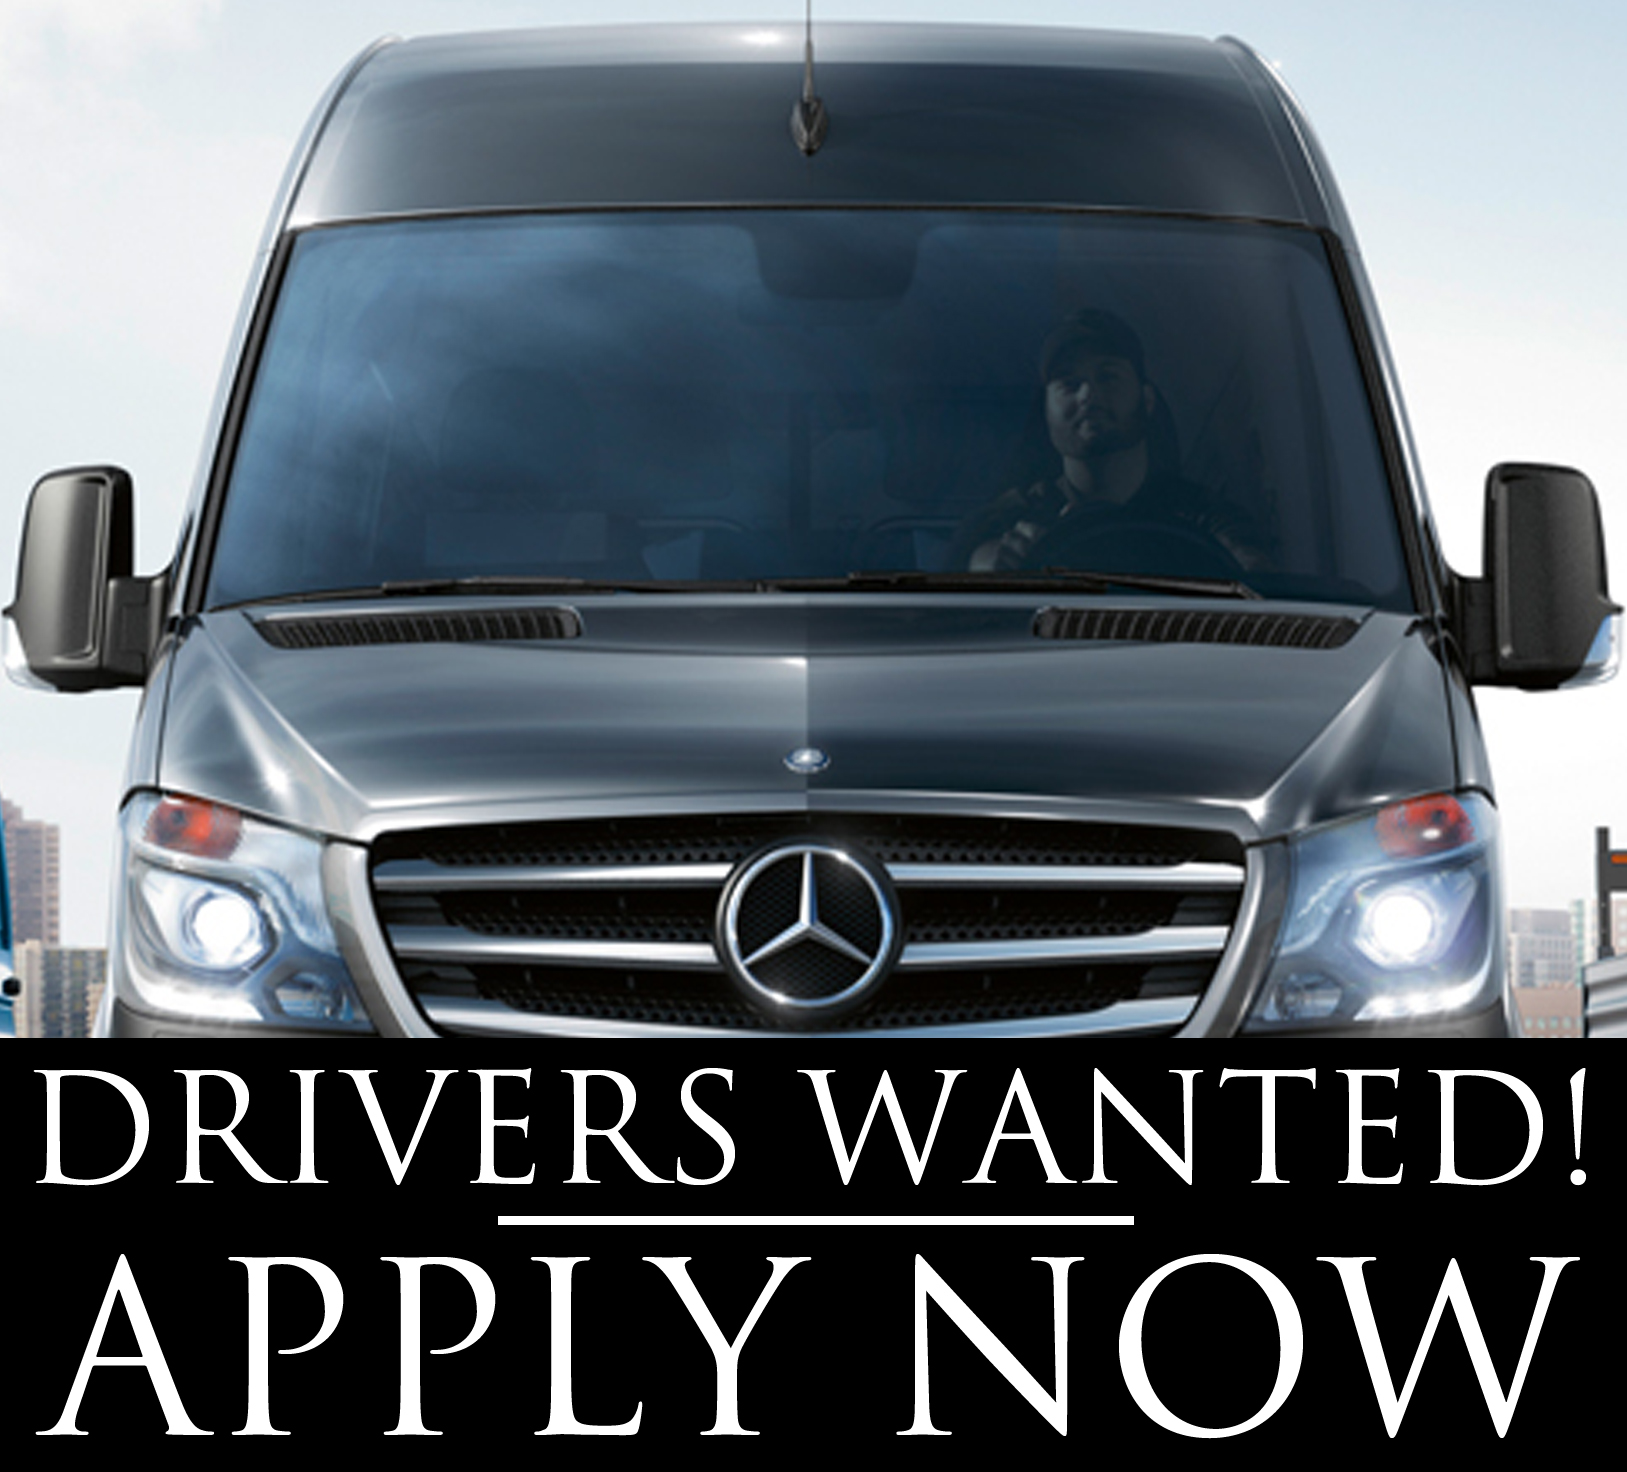 DRIVERS WANTED drive away